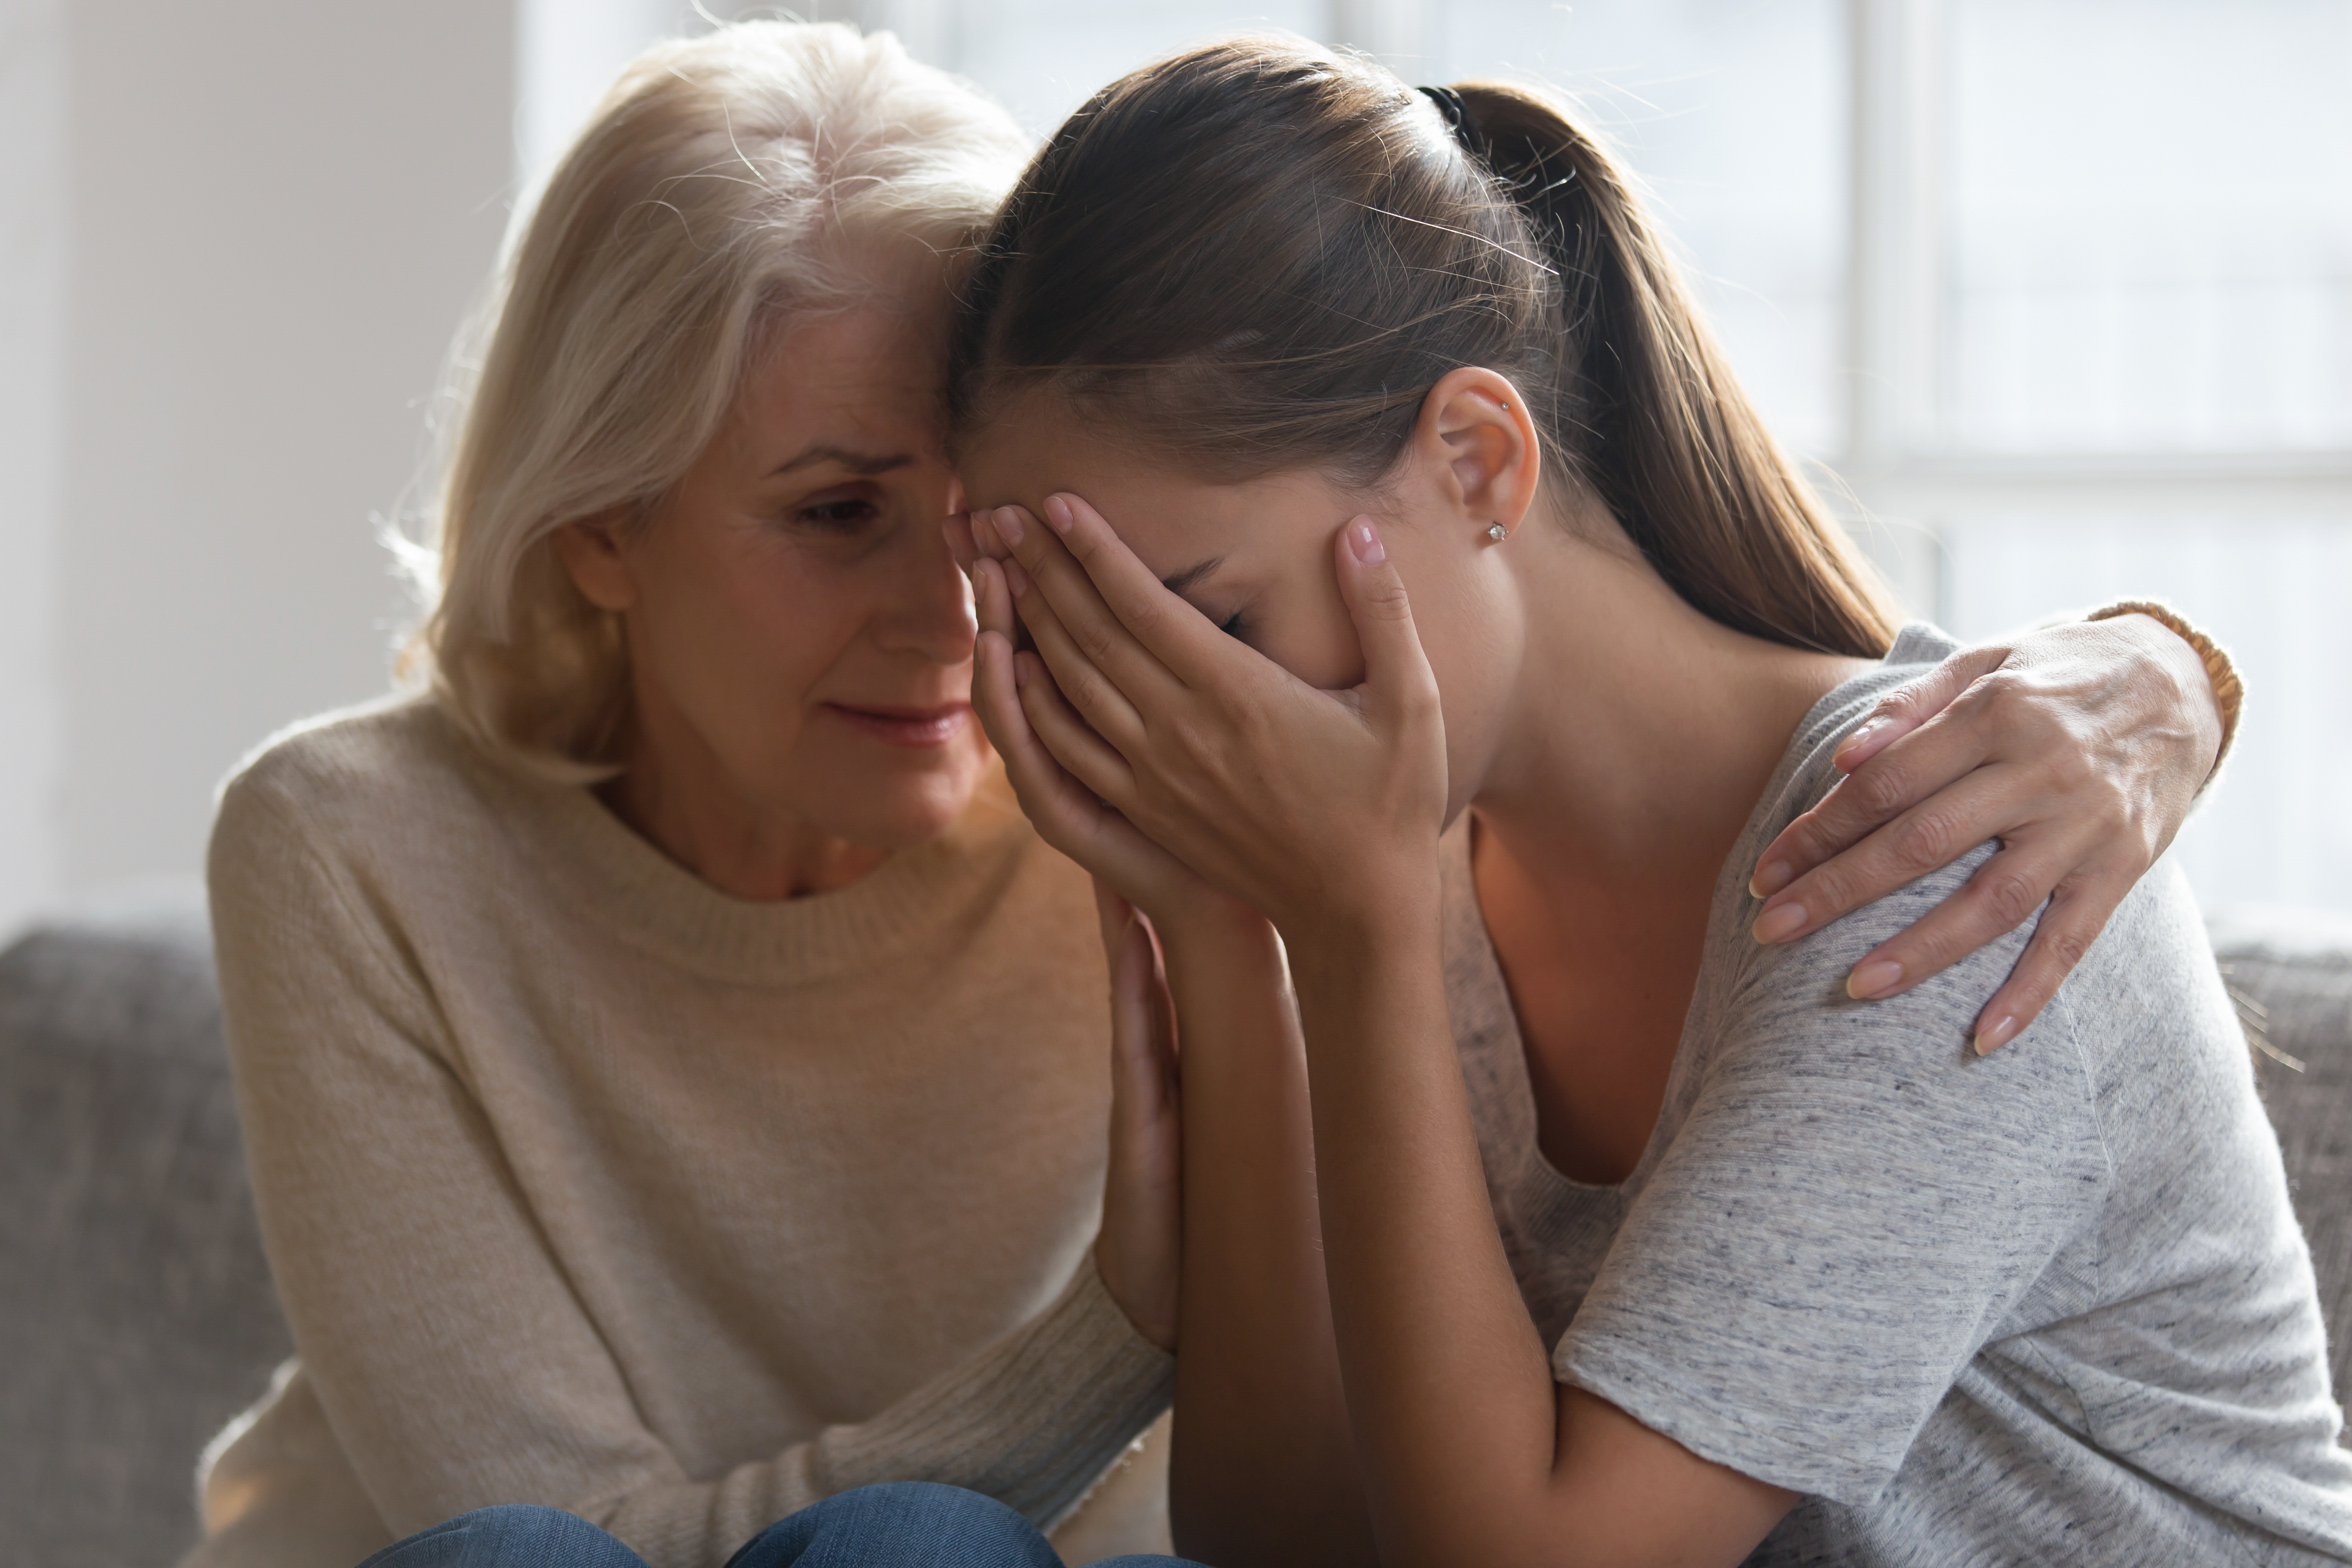 A worried mother embracing her daughter | Source: Shutterstock